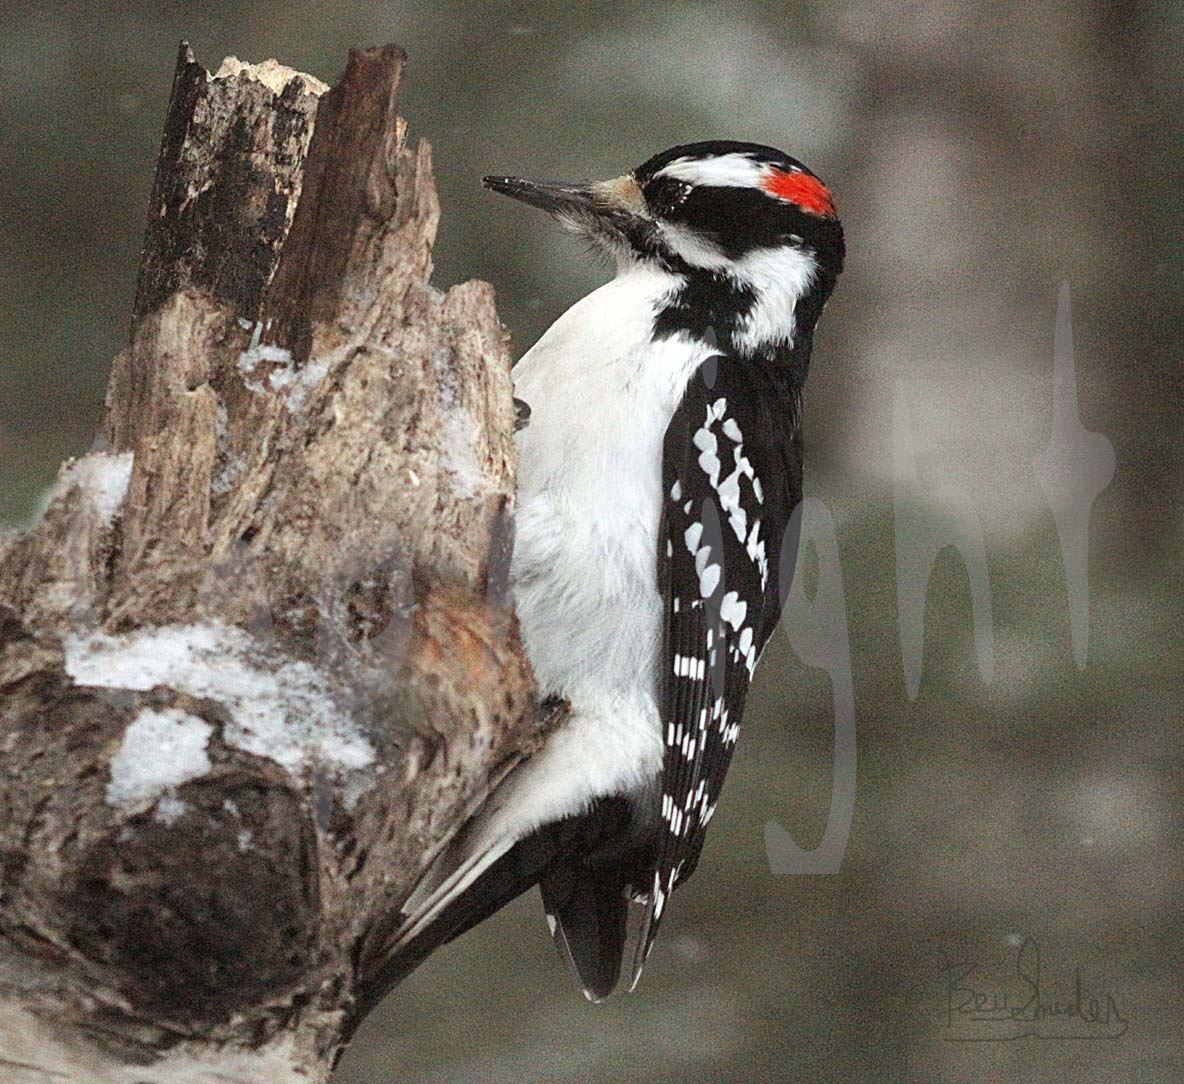 Male Hairy Woodpecker 2906 A beautiful wild bright red headed male Hairy Woodpecker by Snookies Place of Wildlife and Nature